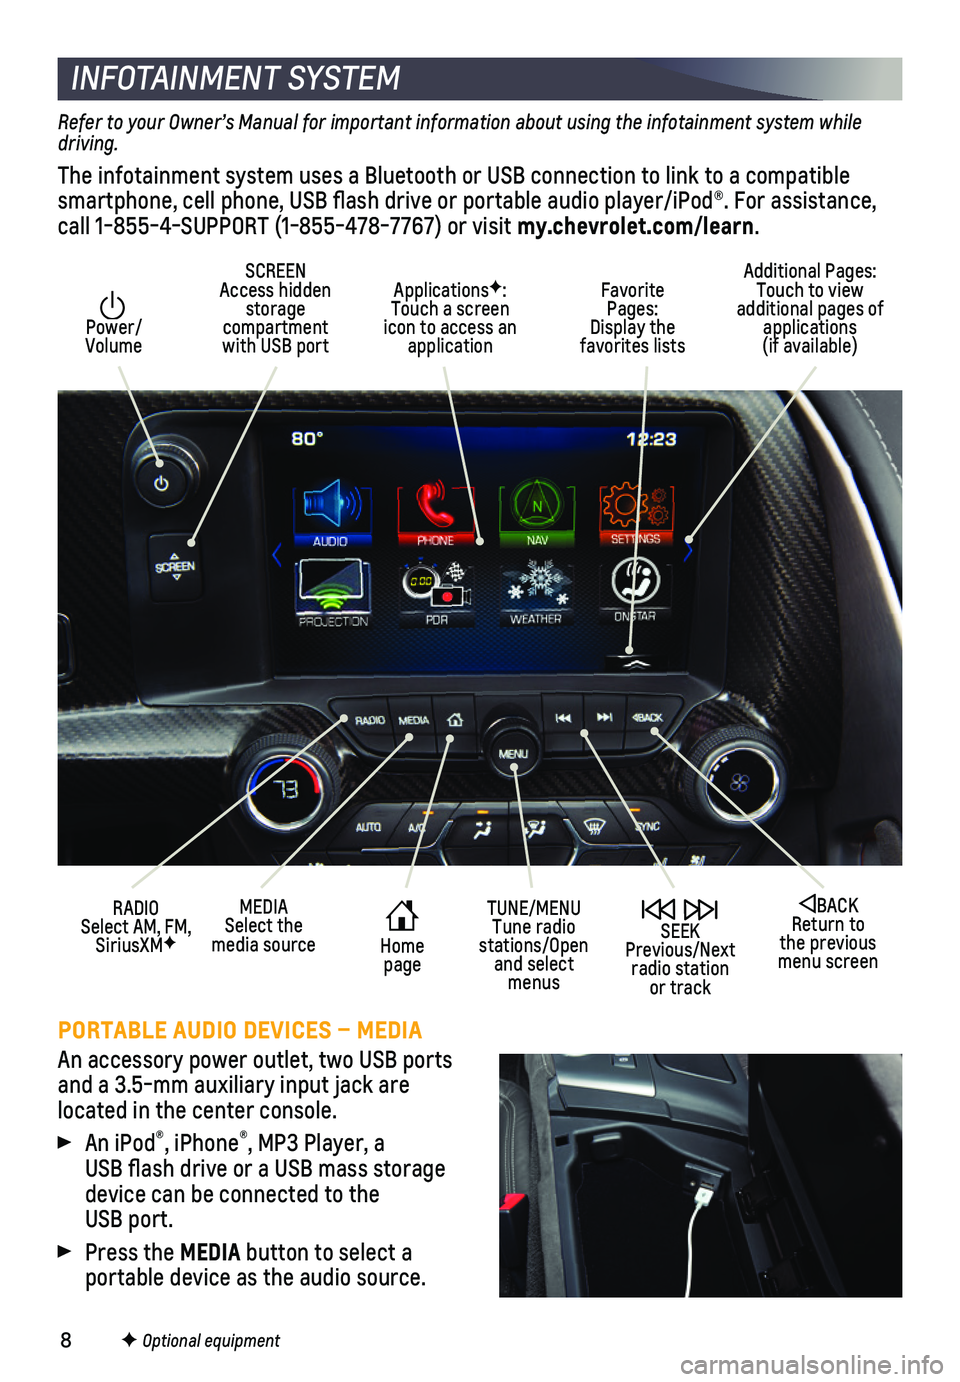 CHEVROLET CORVETTE 2019  Get To Know Guide 8
INFOTAINMENT SYSTEM
 Power/ Volume
Additional Pages: Touch to view additional pages of applications  (if available)
SCREEN Access hidden storage compartment with USB port
ApplicationsF: Touch a scre